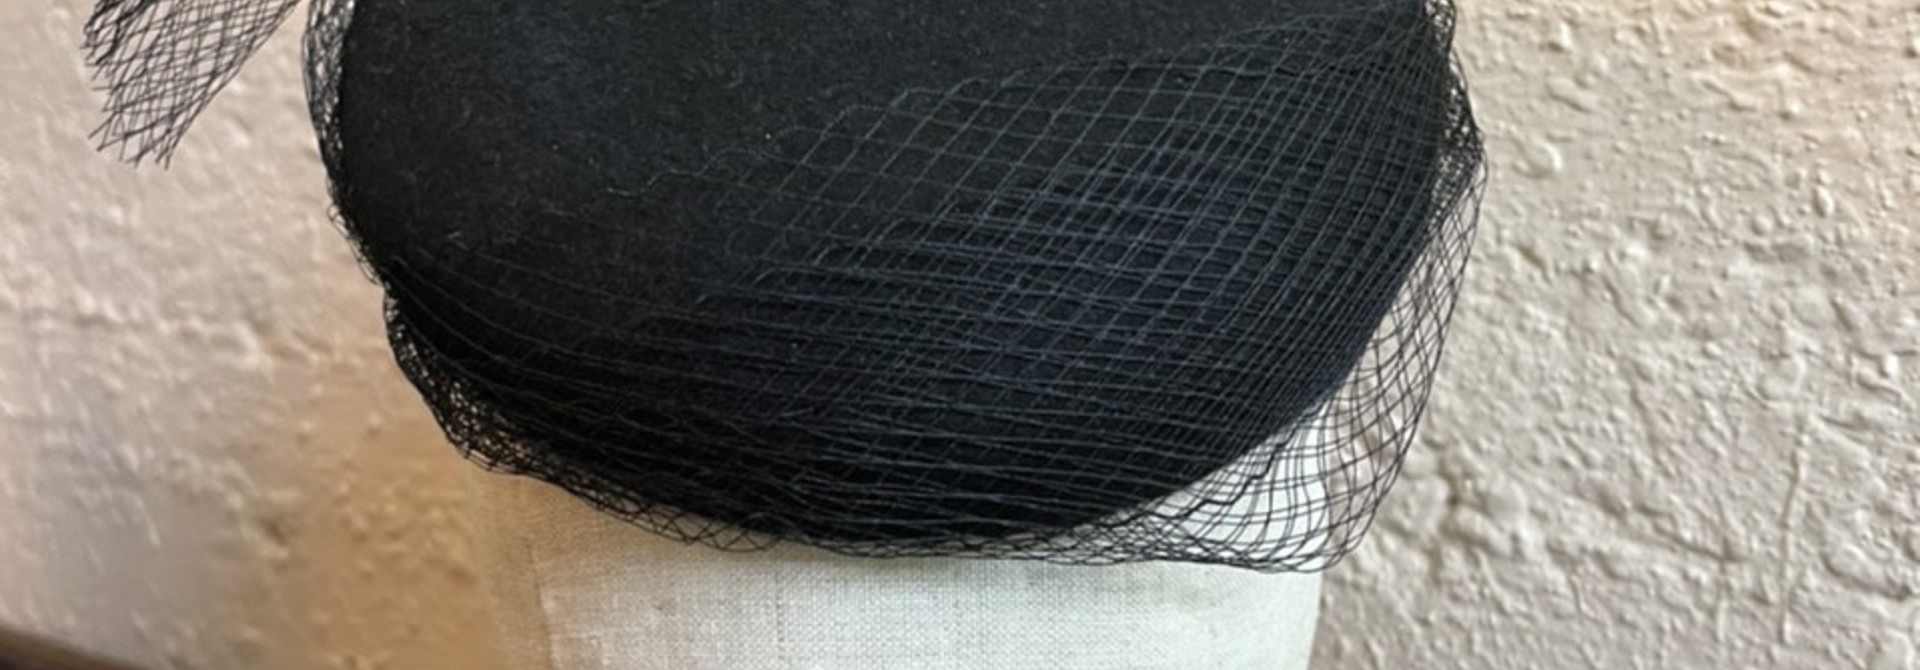 Kalico Delafay Black Felted Button Beret with Fishnet Veil